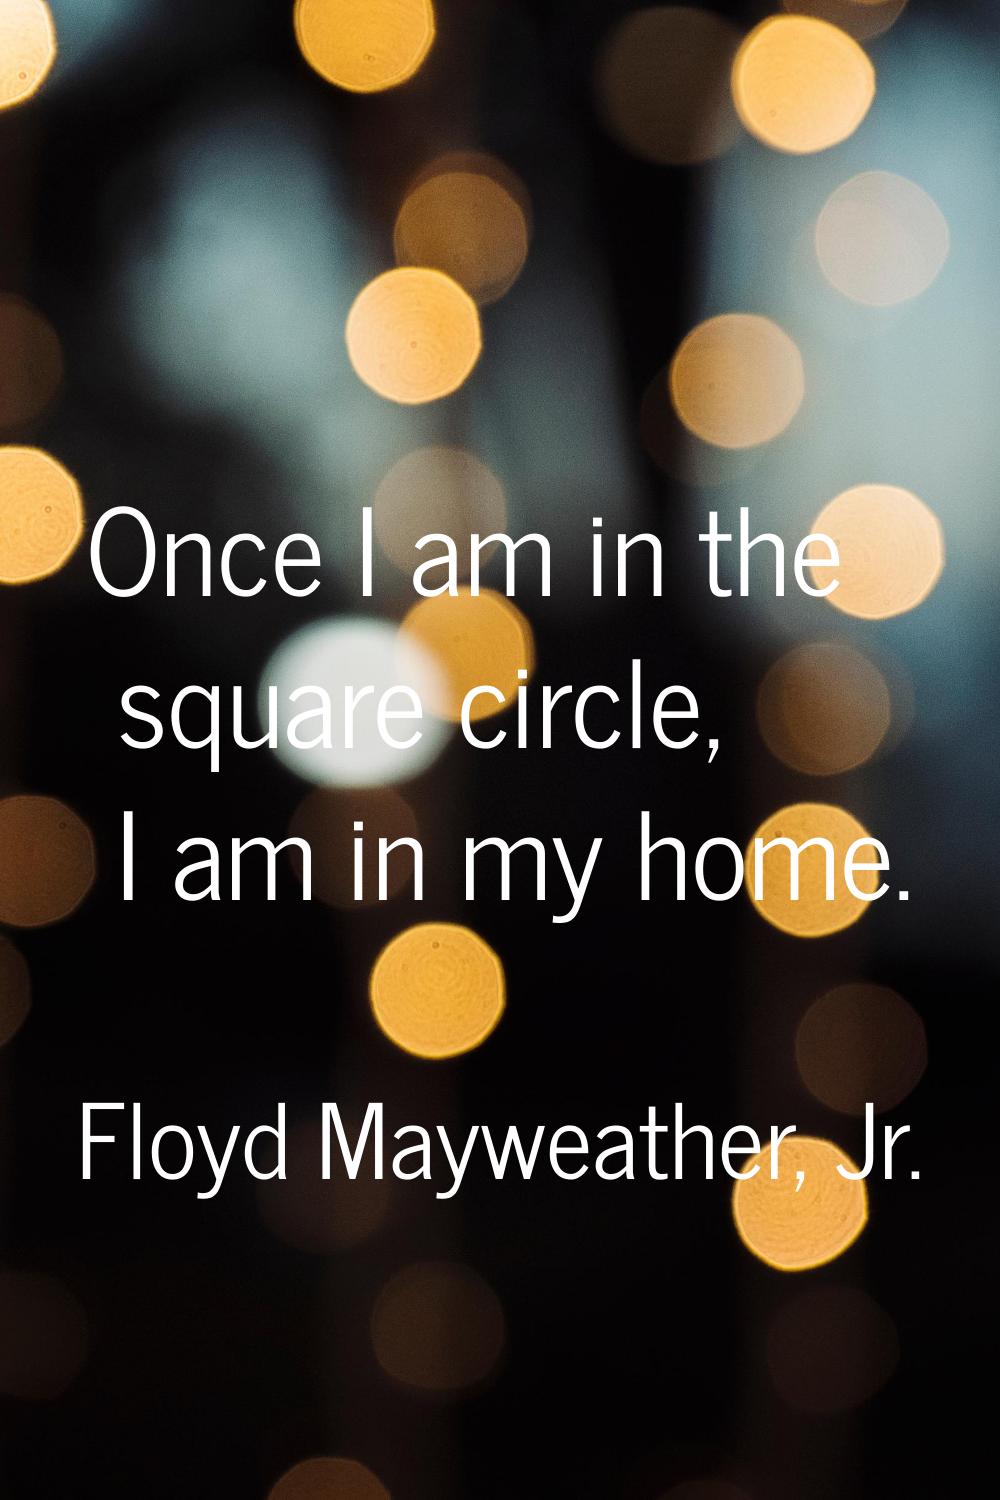 Once I am in the square circle, I am in my home.